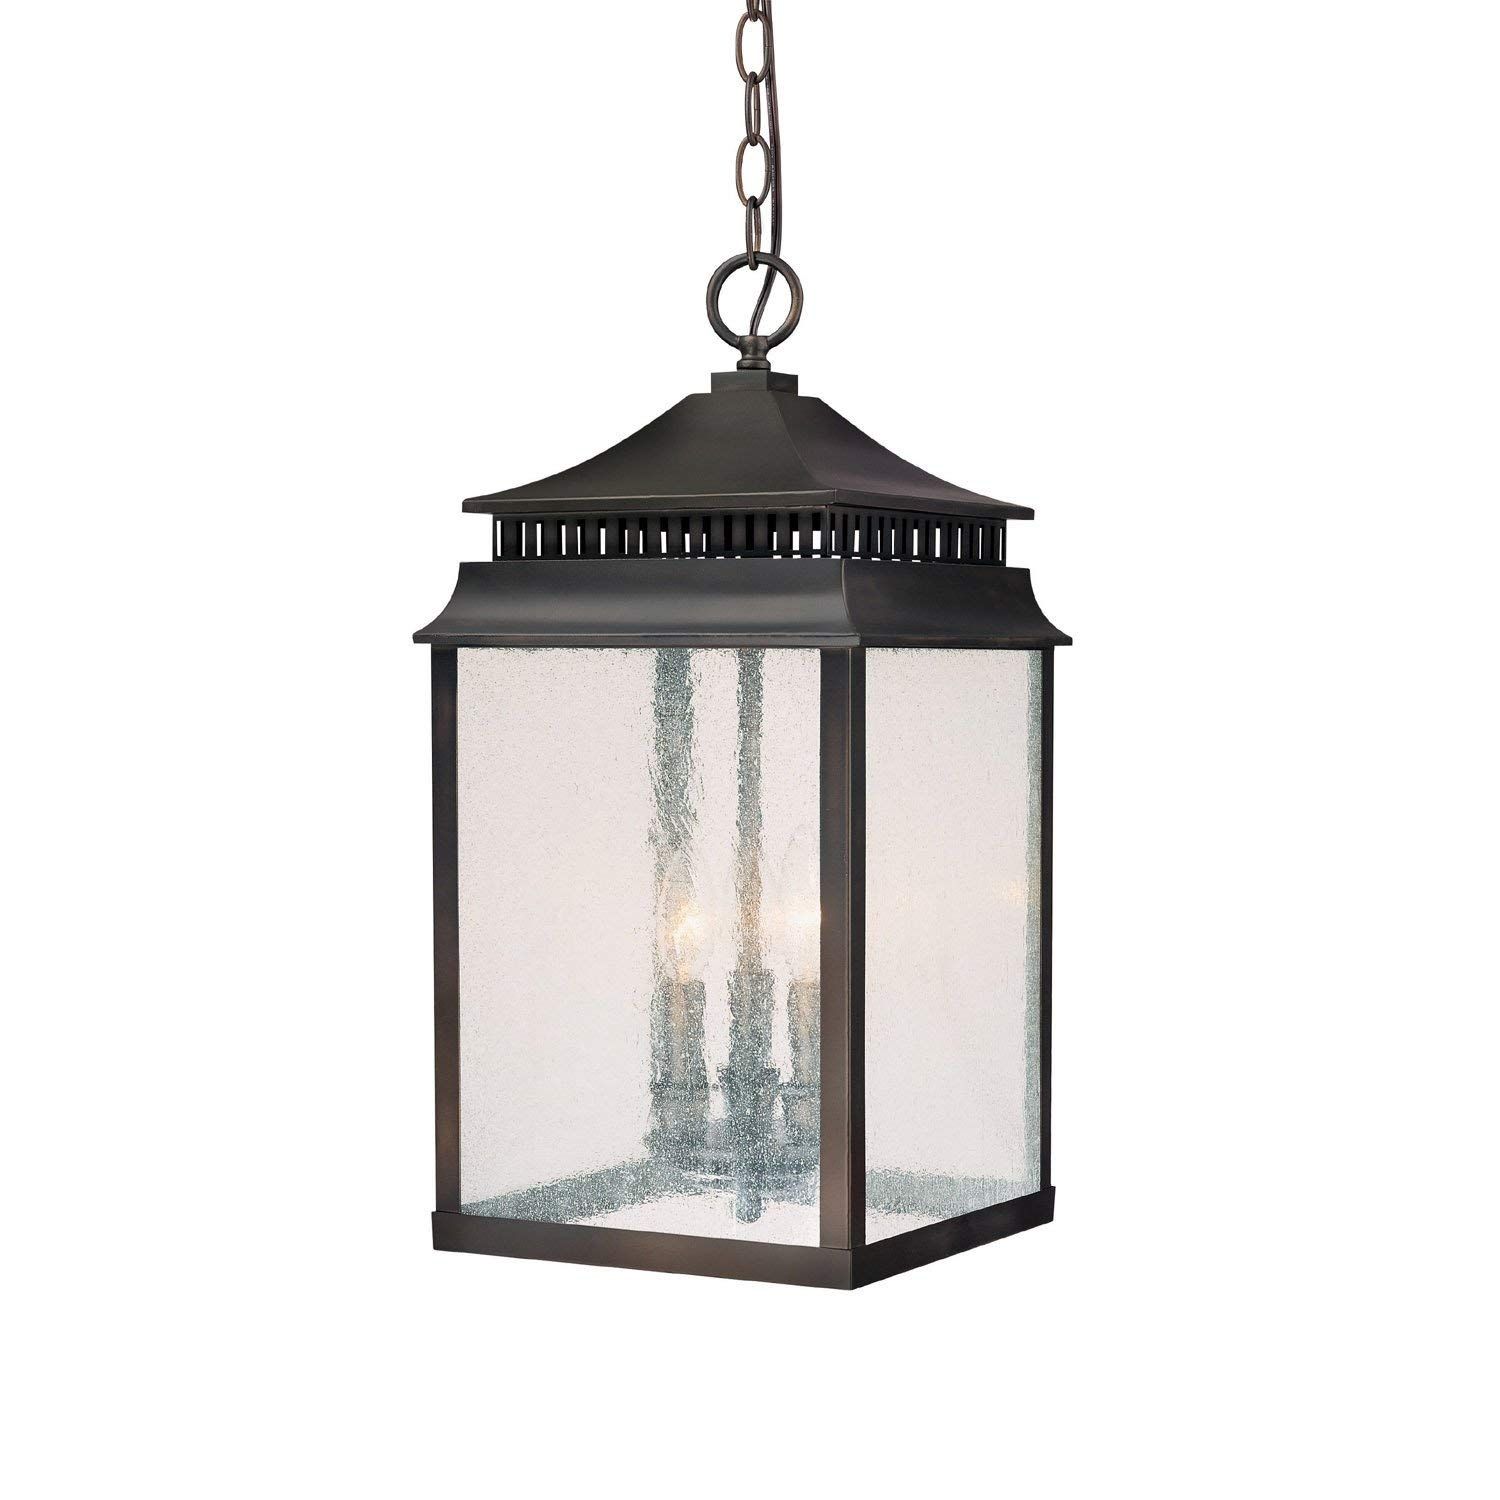 Capital Lighting 9116ob Sutter Creek 3 Light Exterior Hanging Intended For Outdoor Lanterns At Amazon (View 12 of 20)